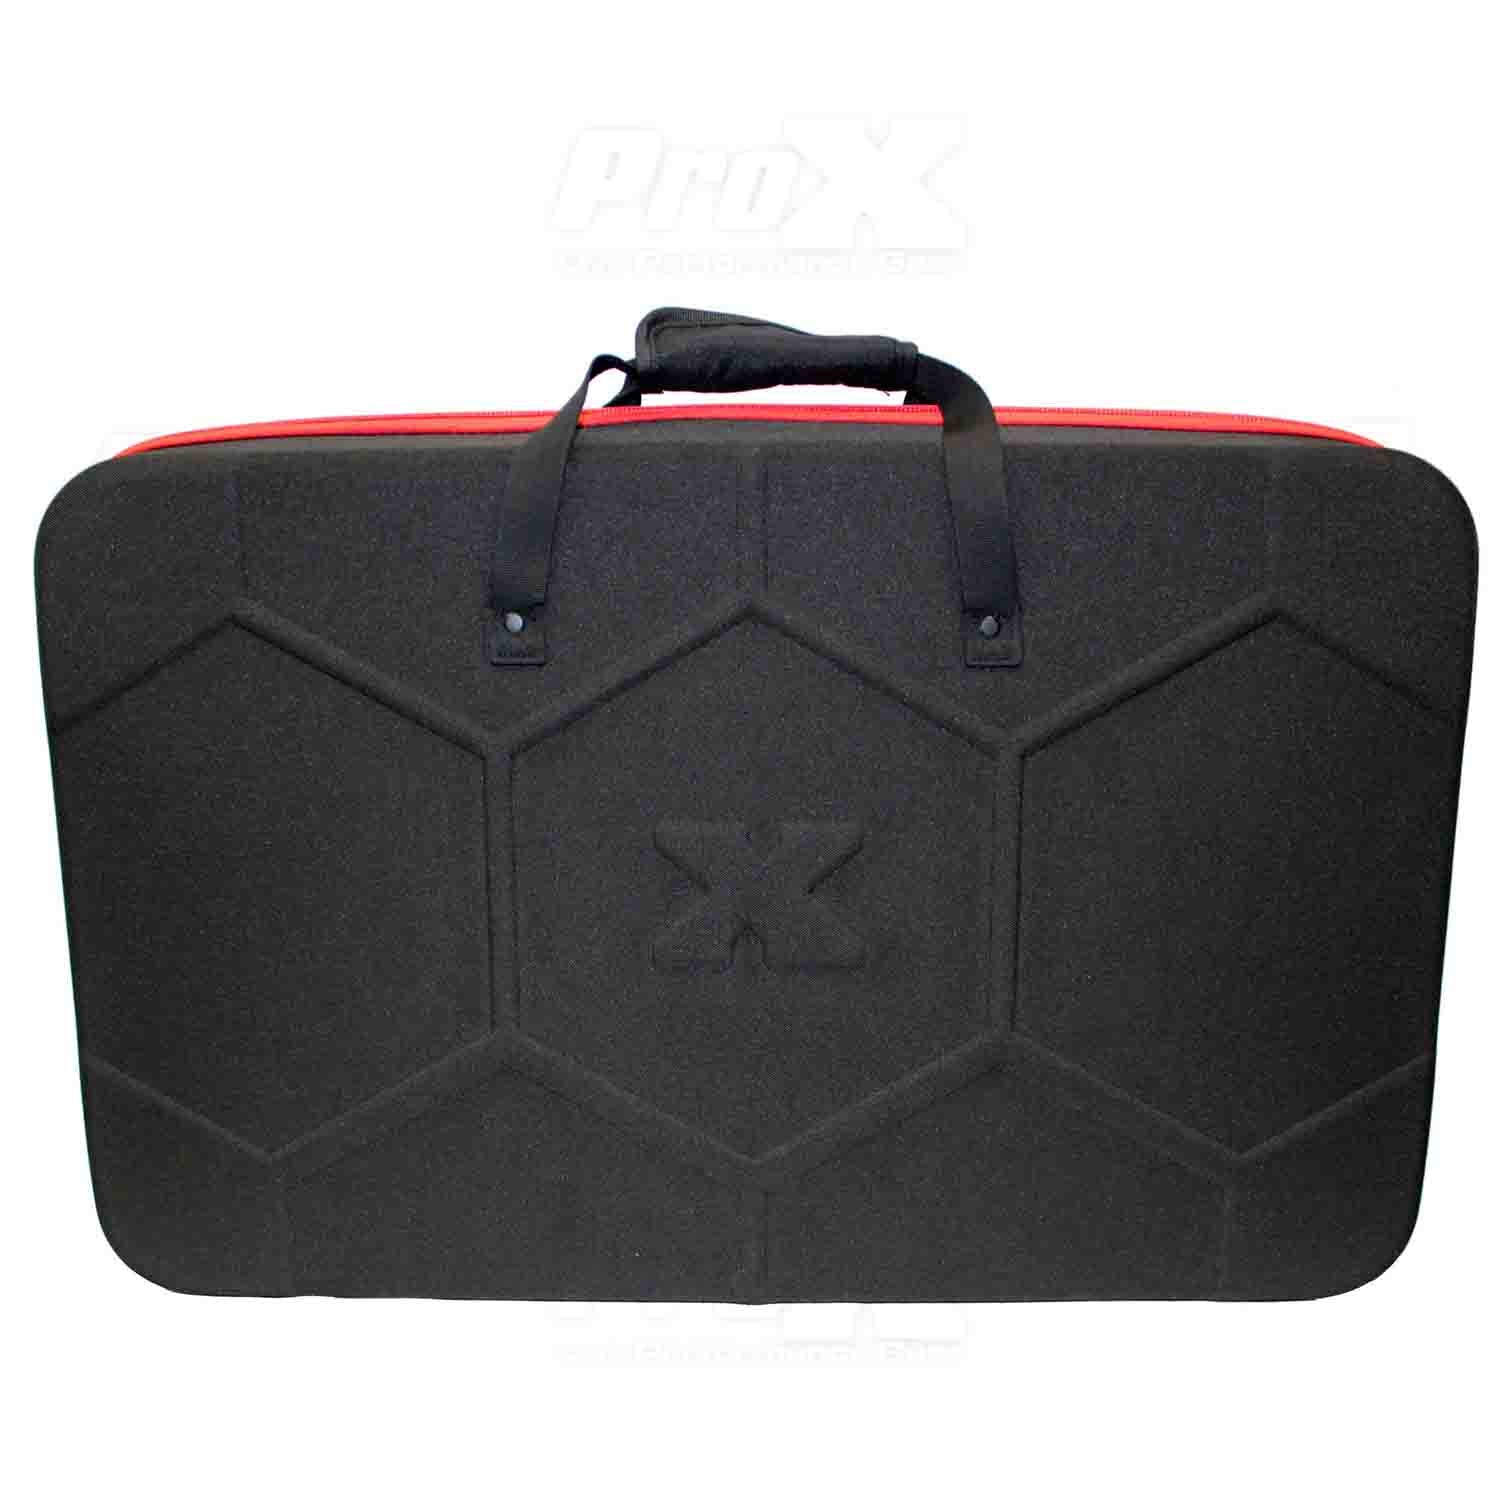 ProX XB-DJCL DJ Controller Case with EVA Ultra-Lightweight Molded and Hard Shell - Hollywood DJ